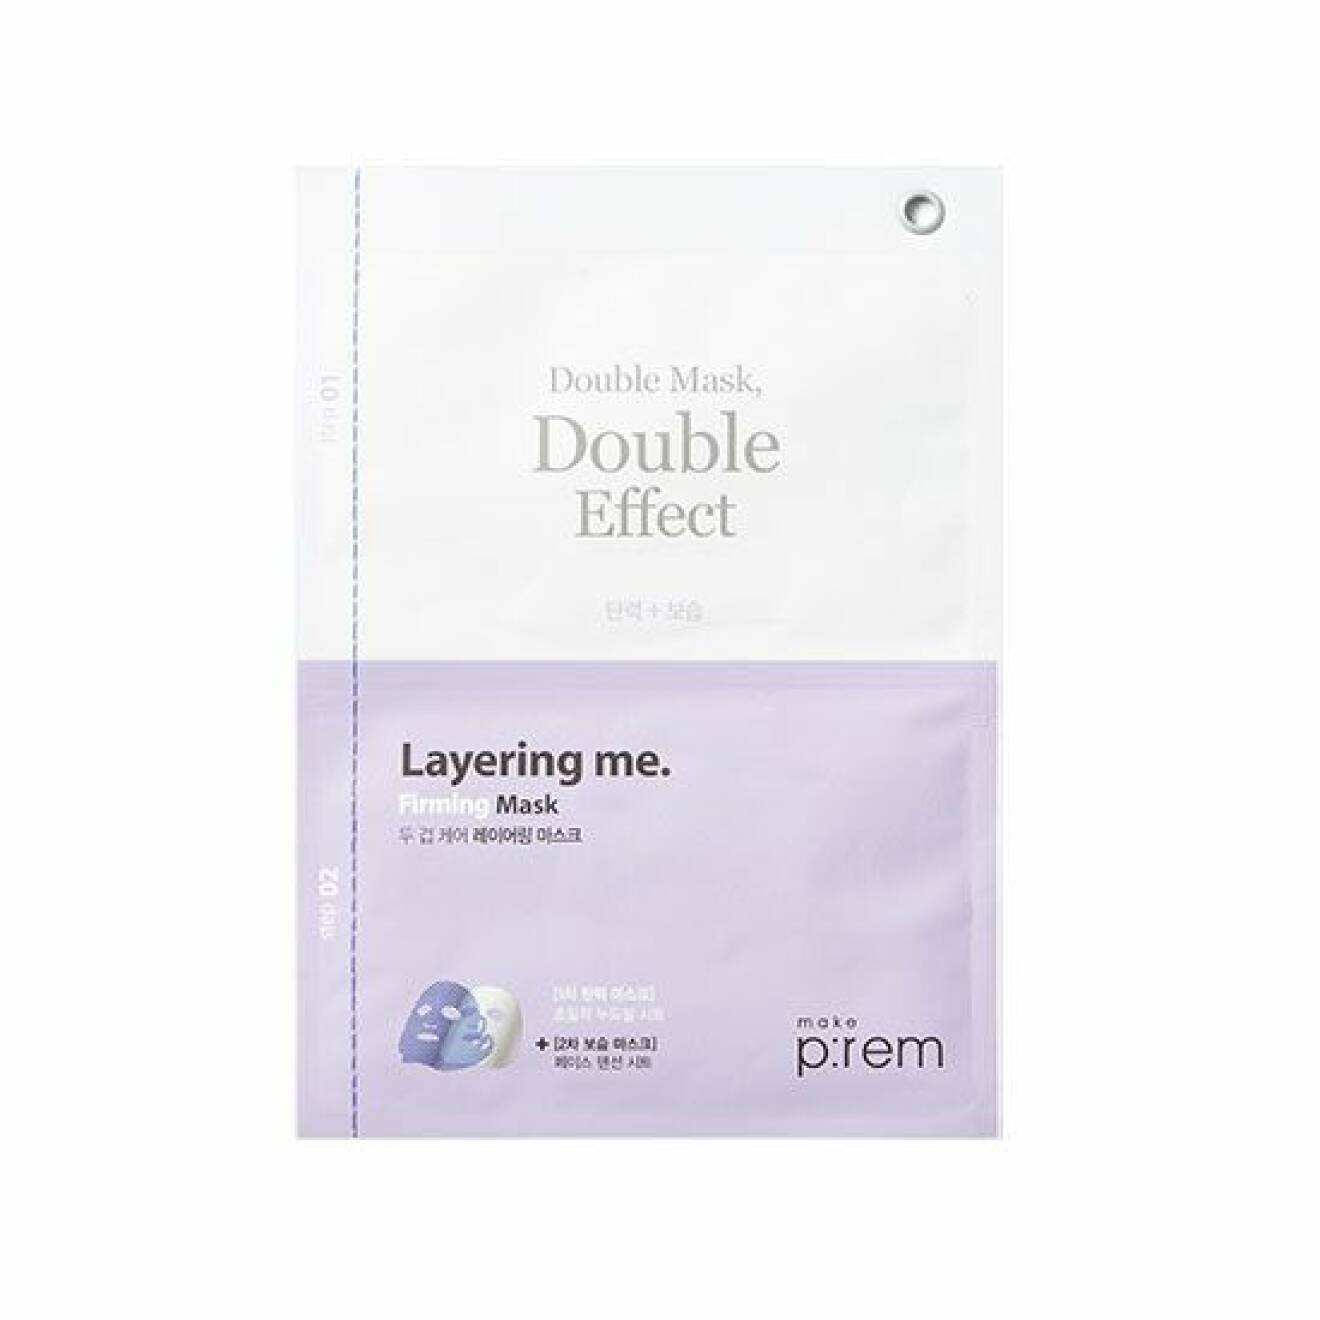 Double Effect Layering Me Firming Mask från Make P:rem.